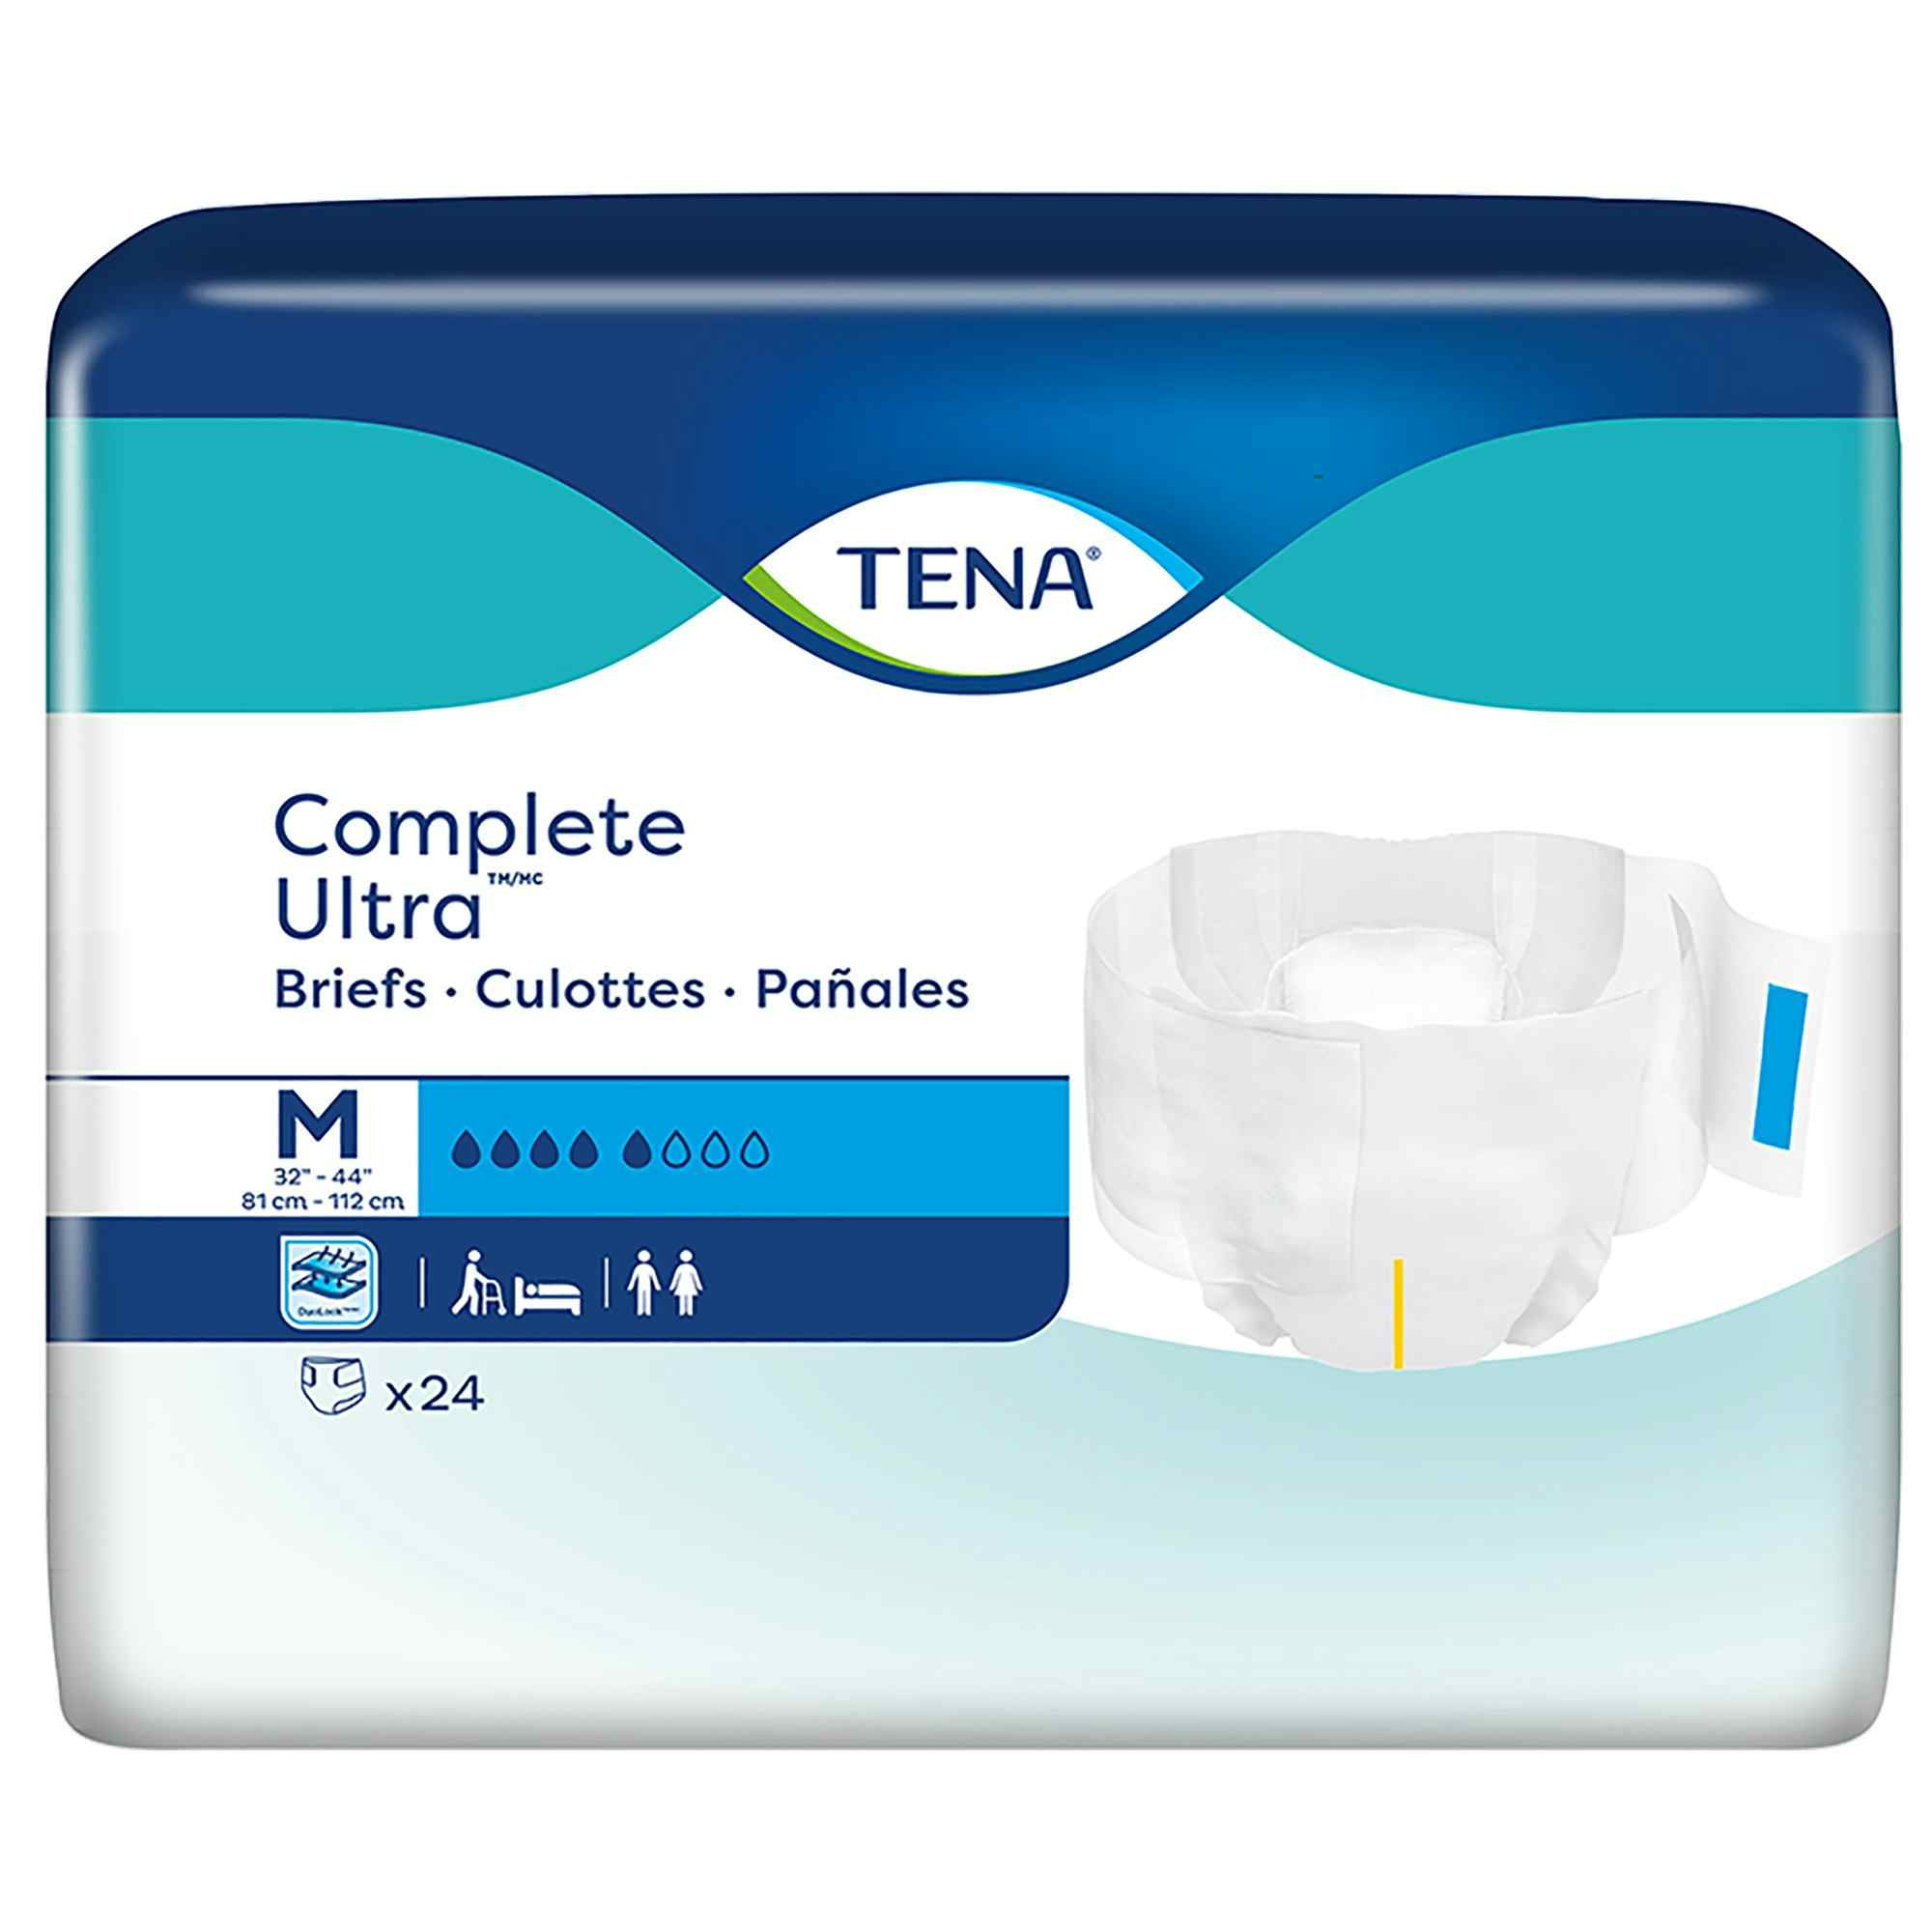 TENA Complete Ultra Unisex Adult Disposable Diaper, Moderate Absorbency, 67322, White - Medium (32-44") - Case of 72 Diapers (3 Bags)